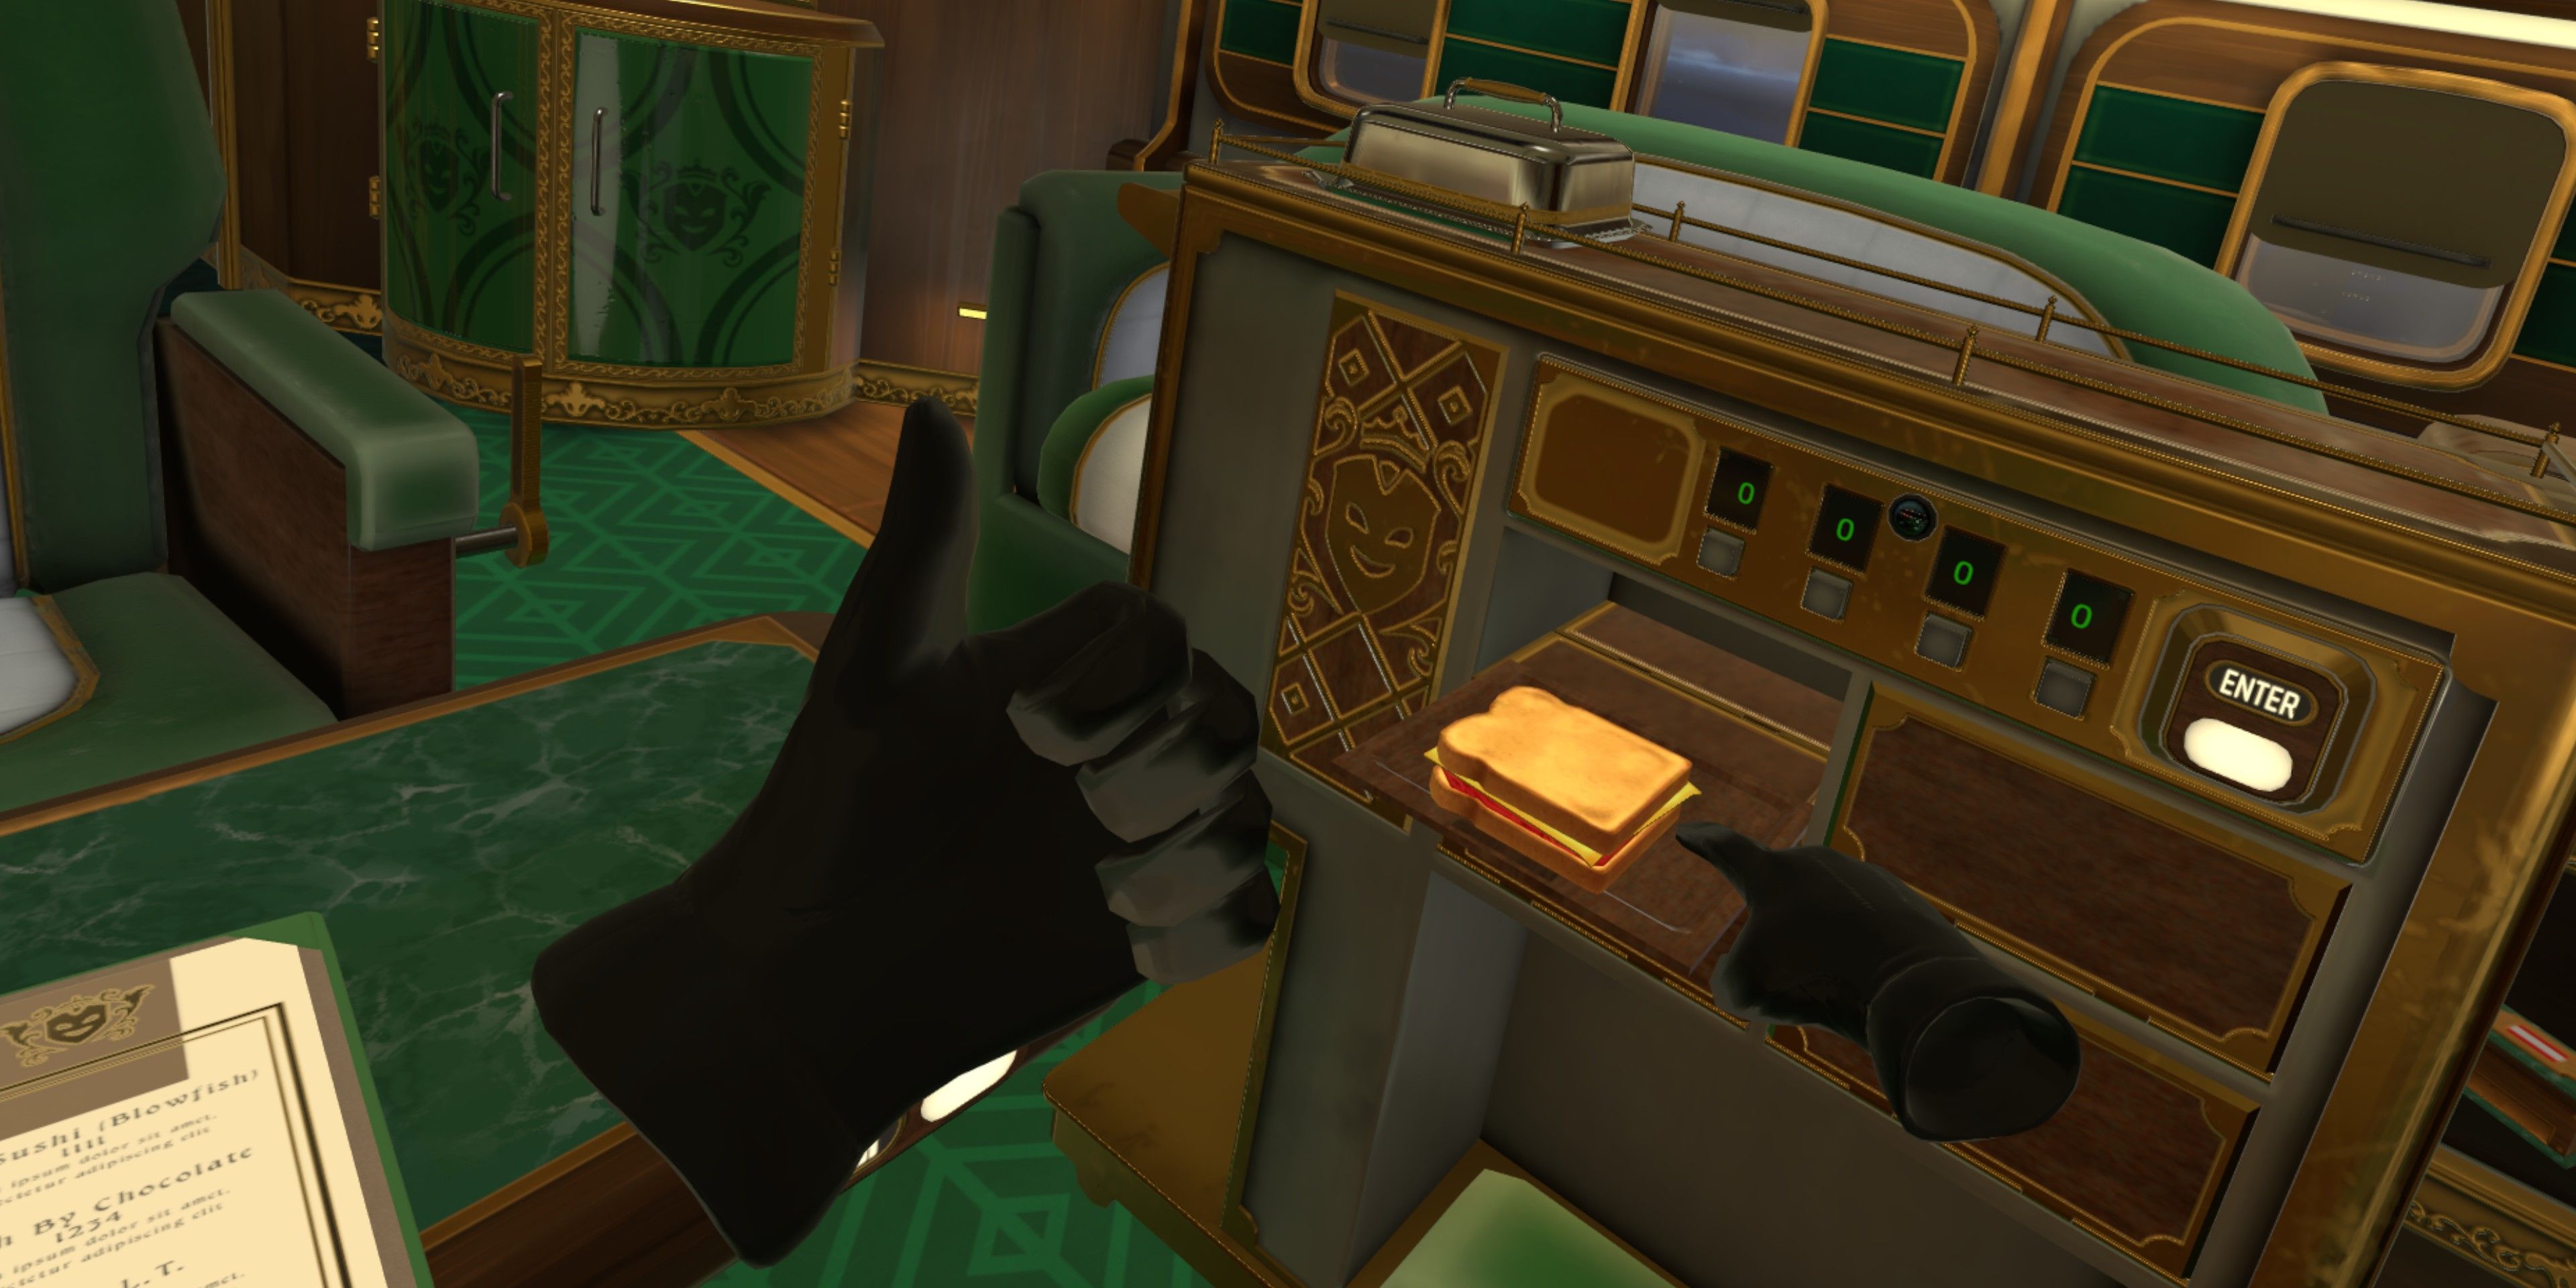 Image from I Expect You To Die 2 Showing a toasted sandwich coming out of a plane's console and a hand giving a thumb's up.